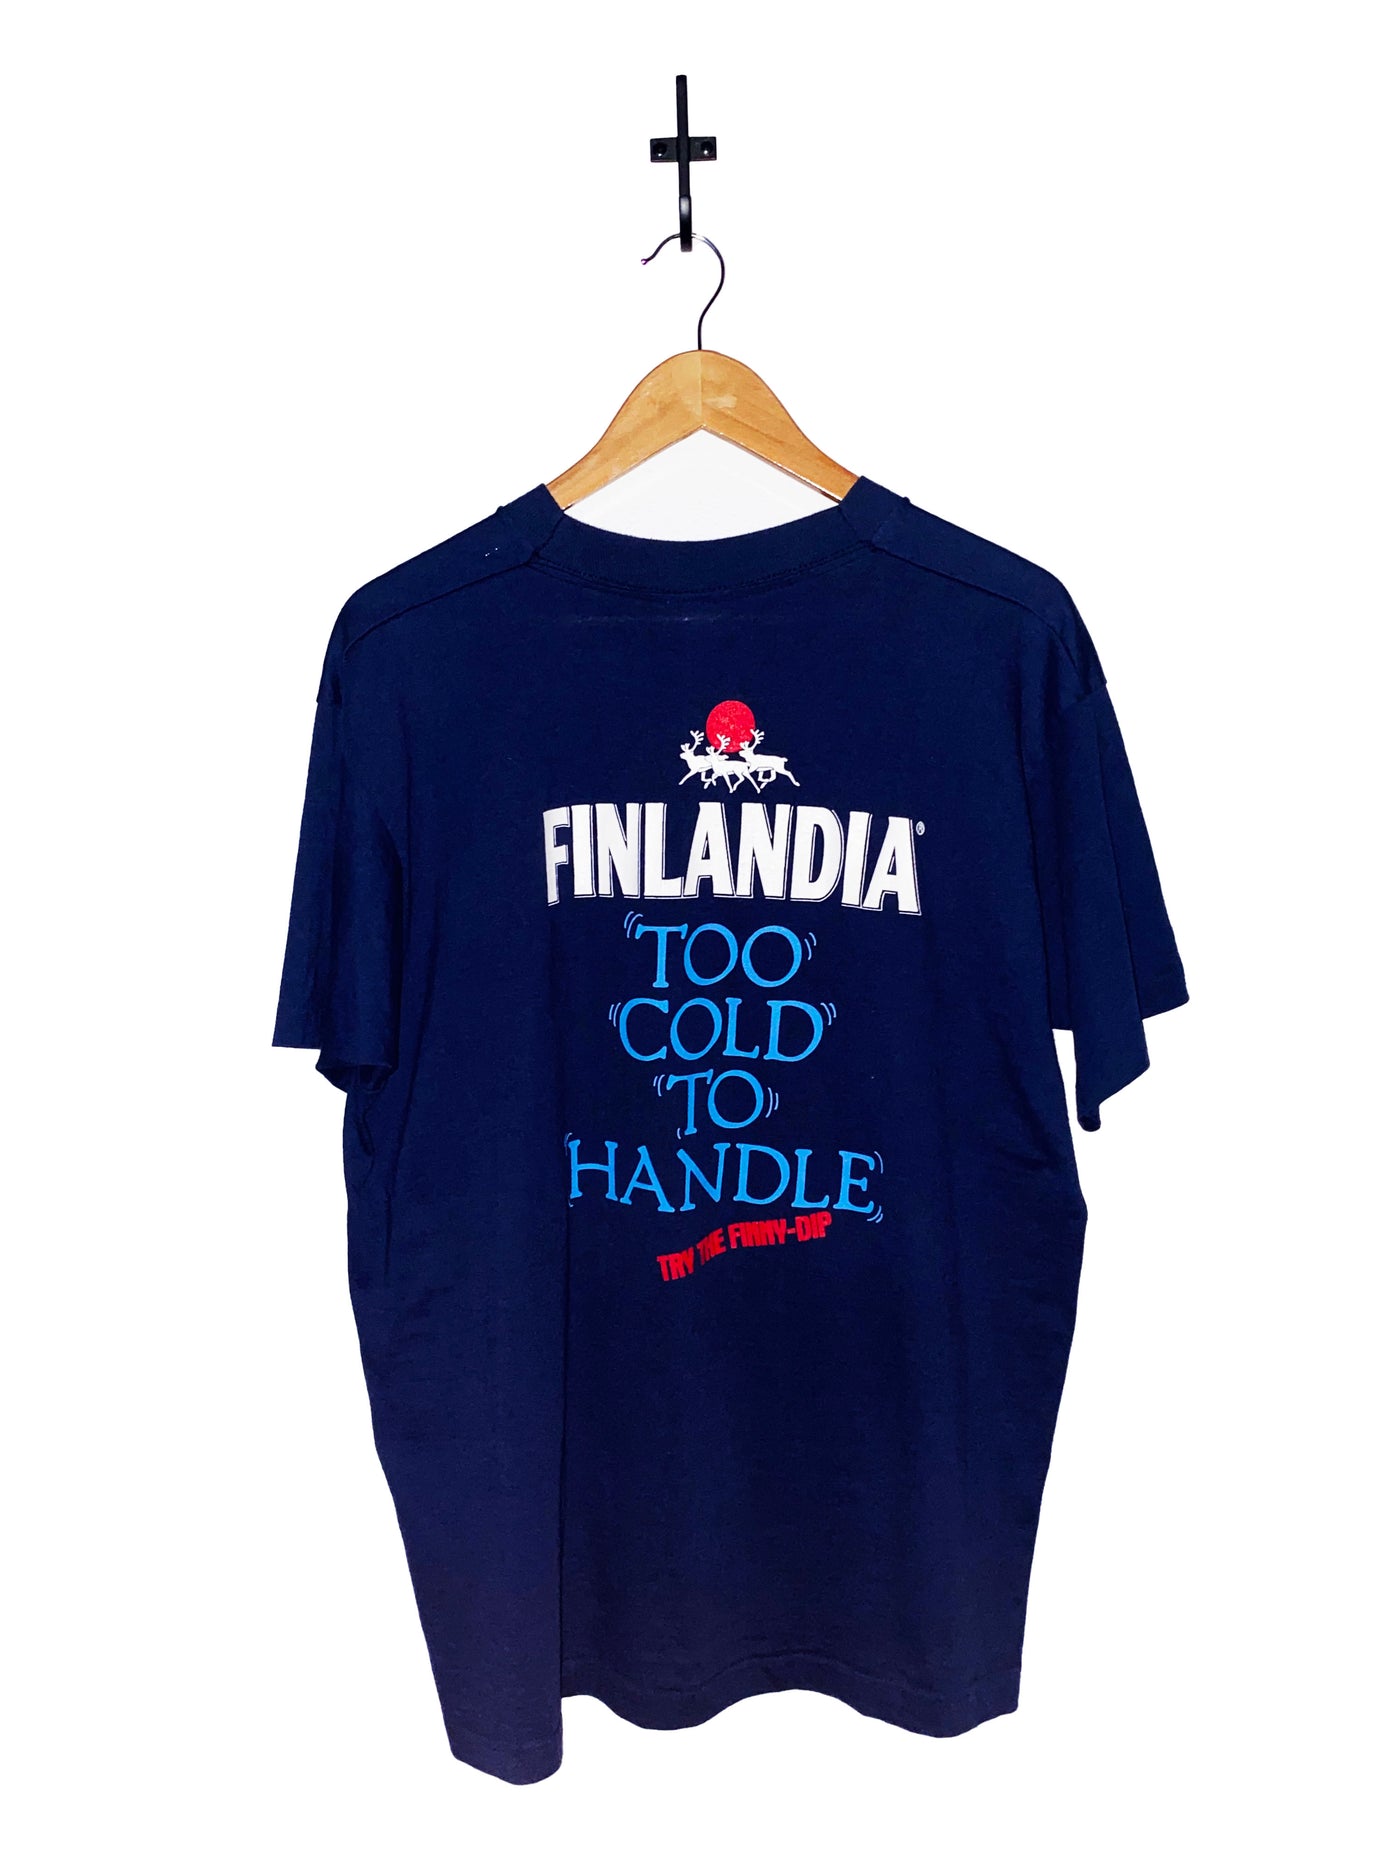 Vintage Finlandia “Too Cold To Handle” T-Shirt